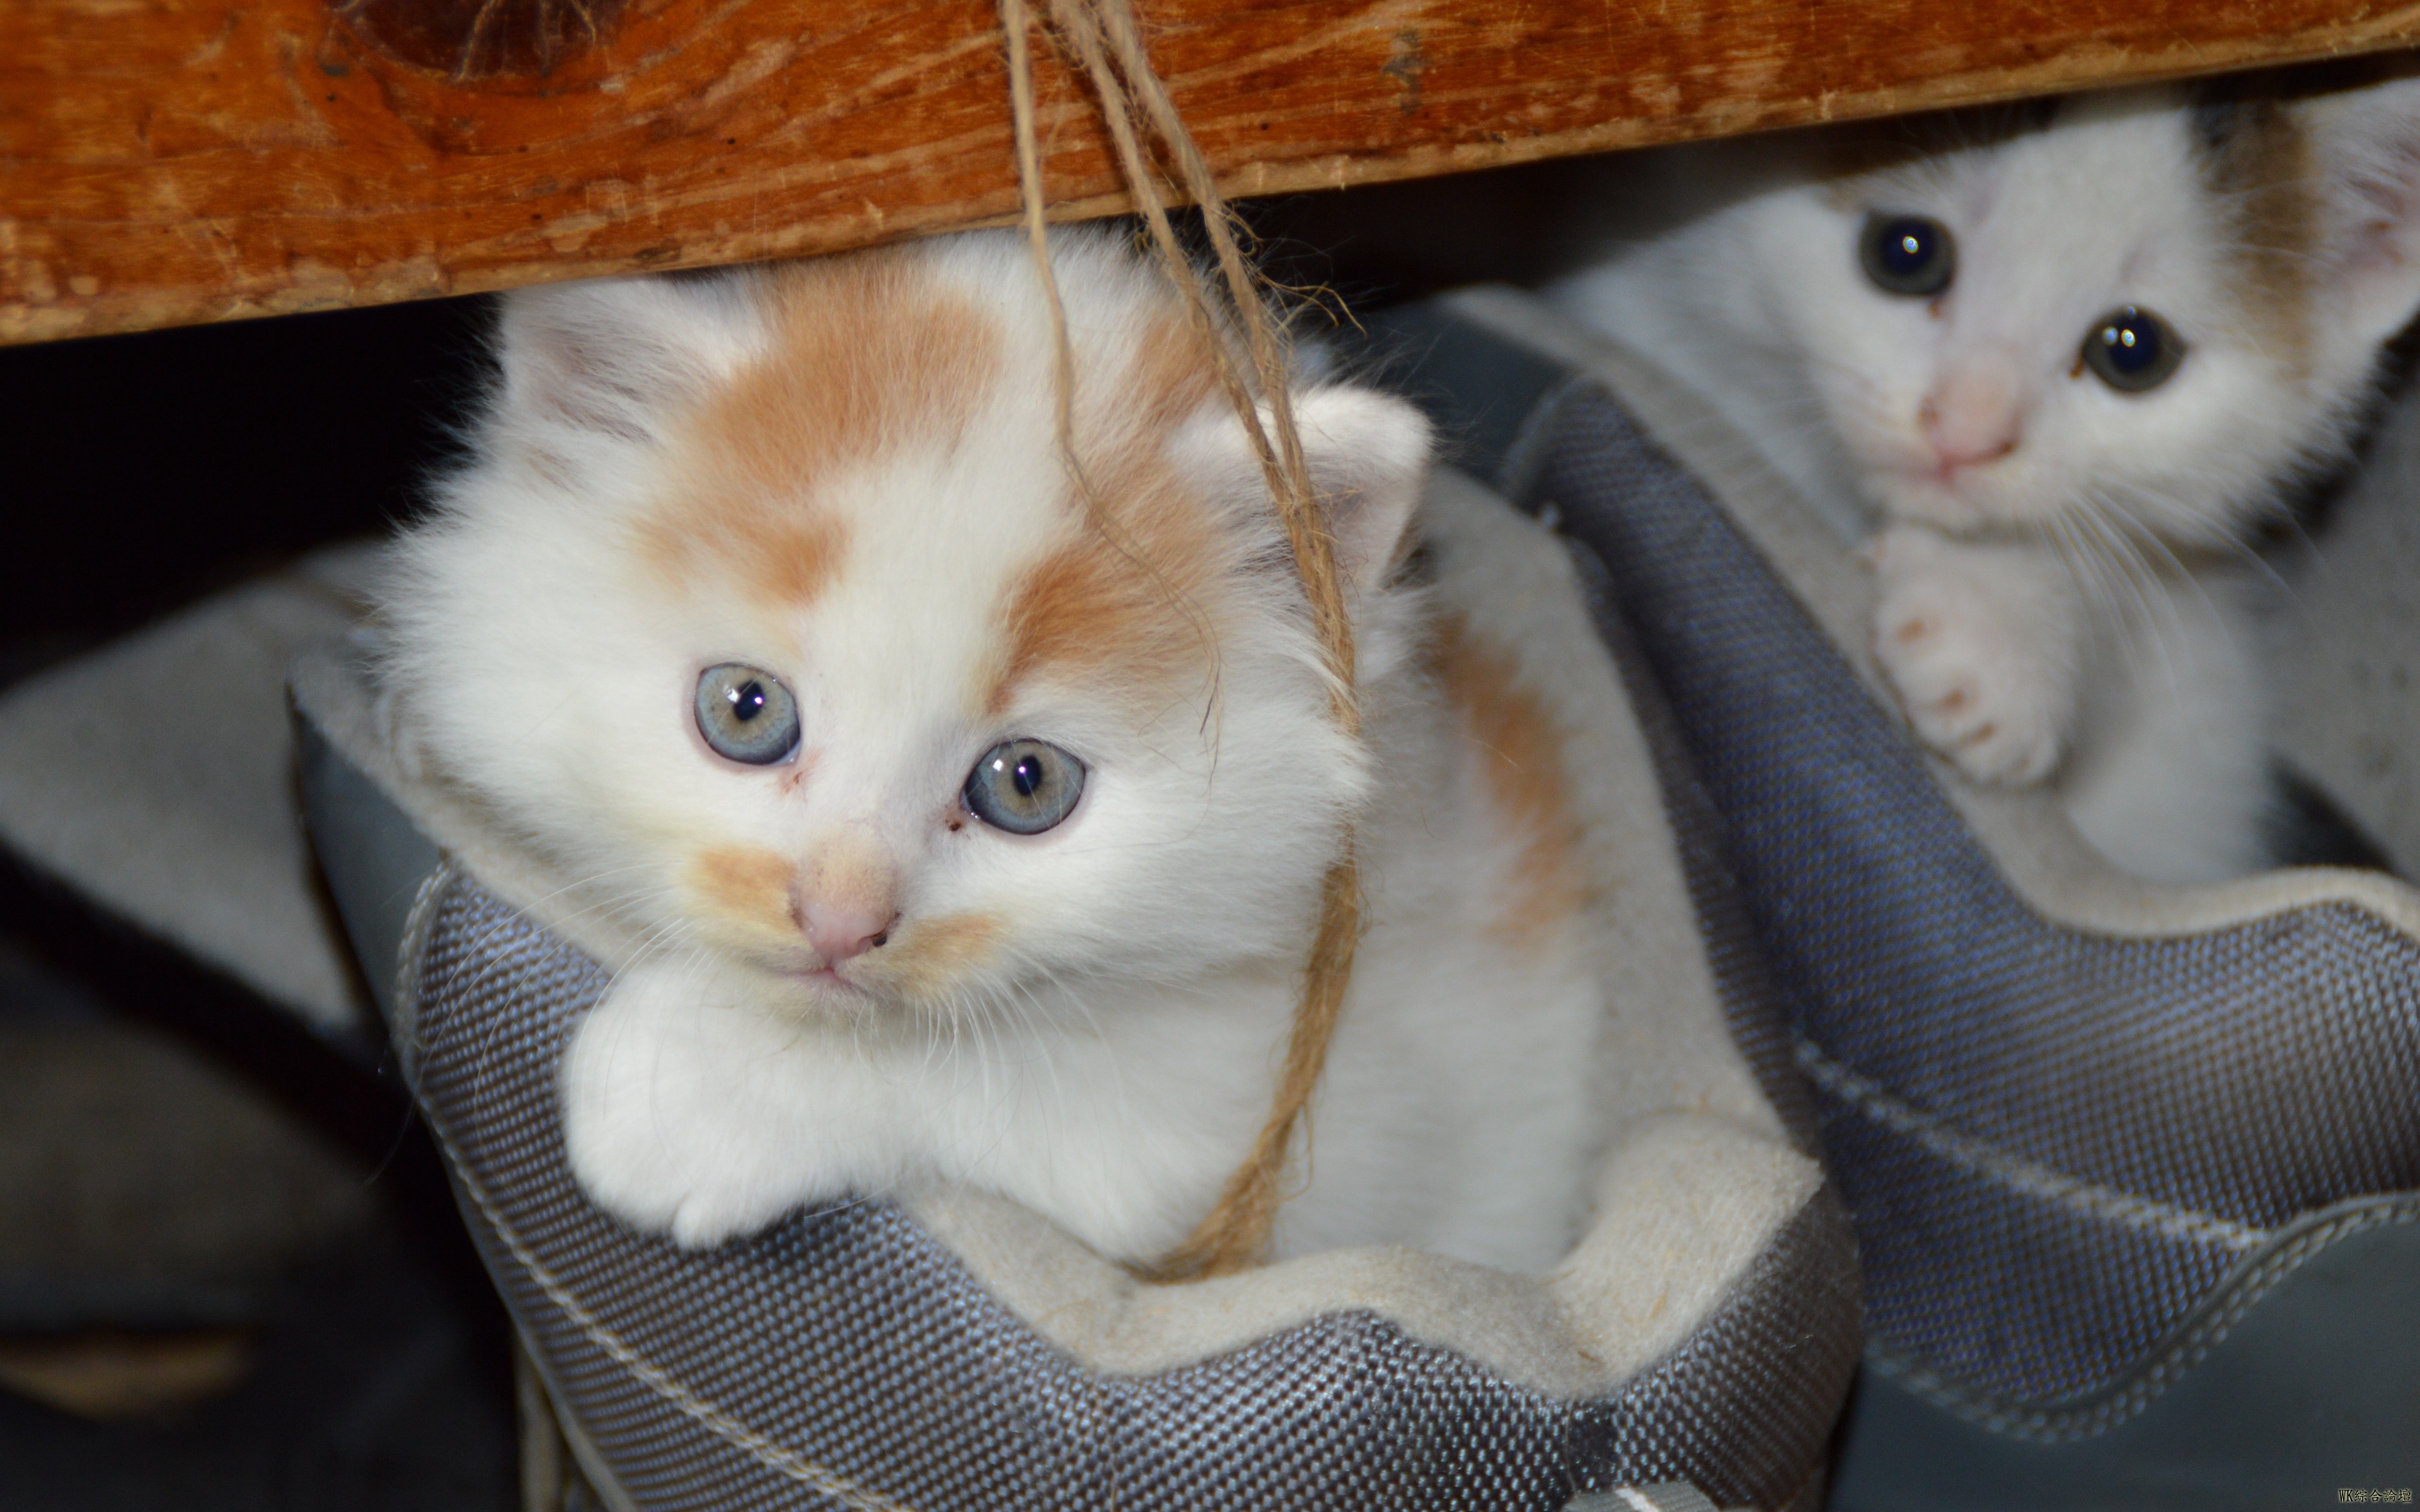 kittens_cats_couple_shoes_hide_106936_3840x2400.jpg